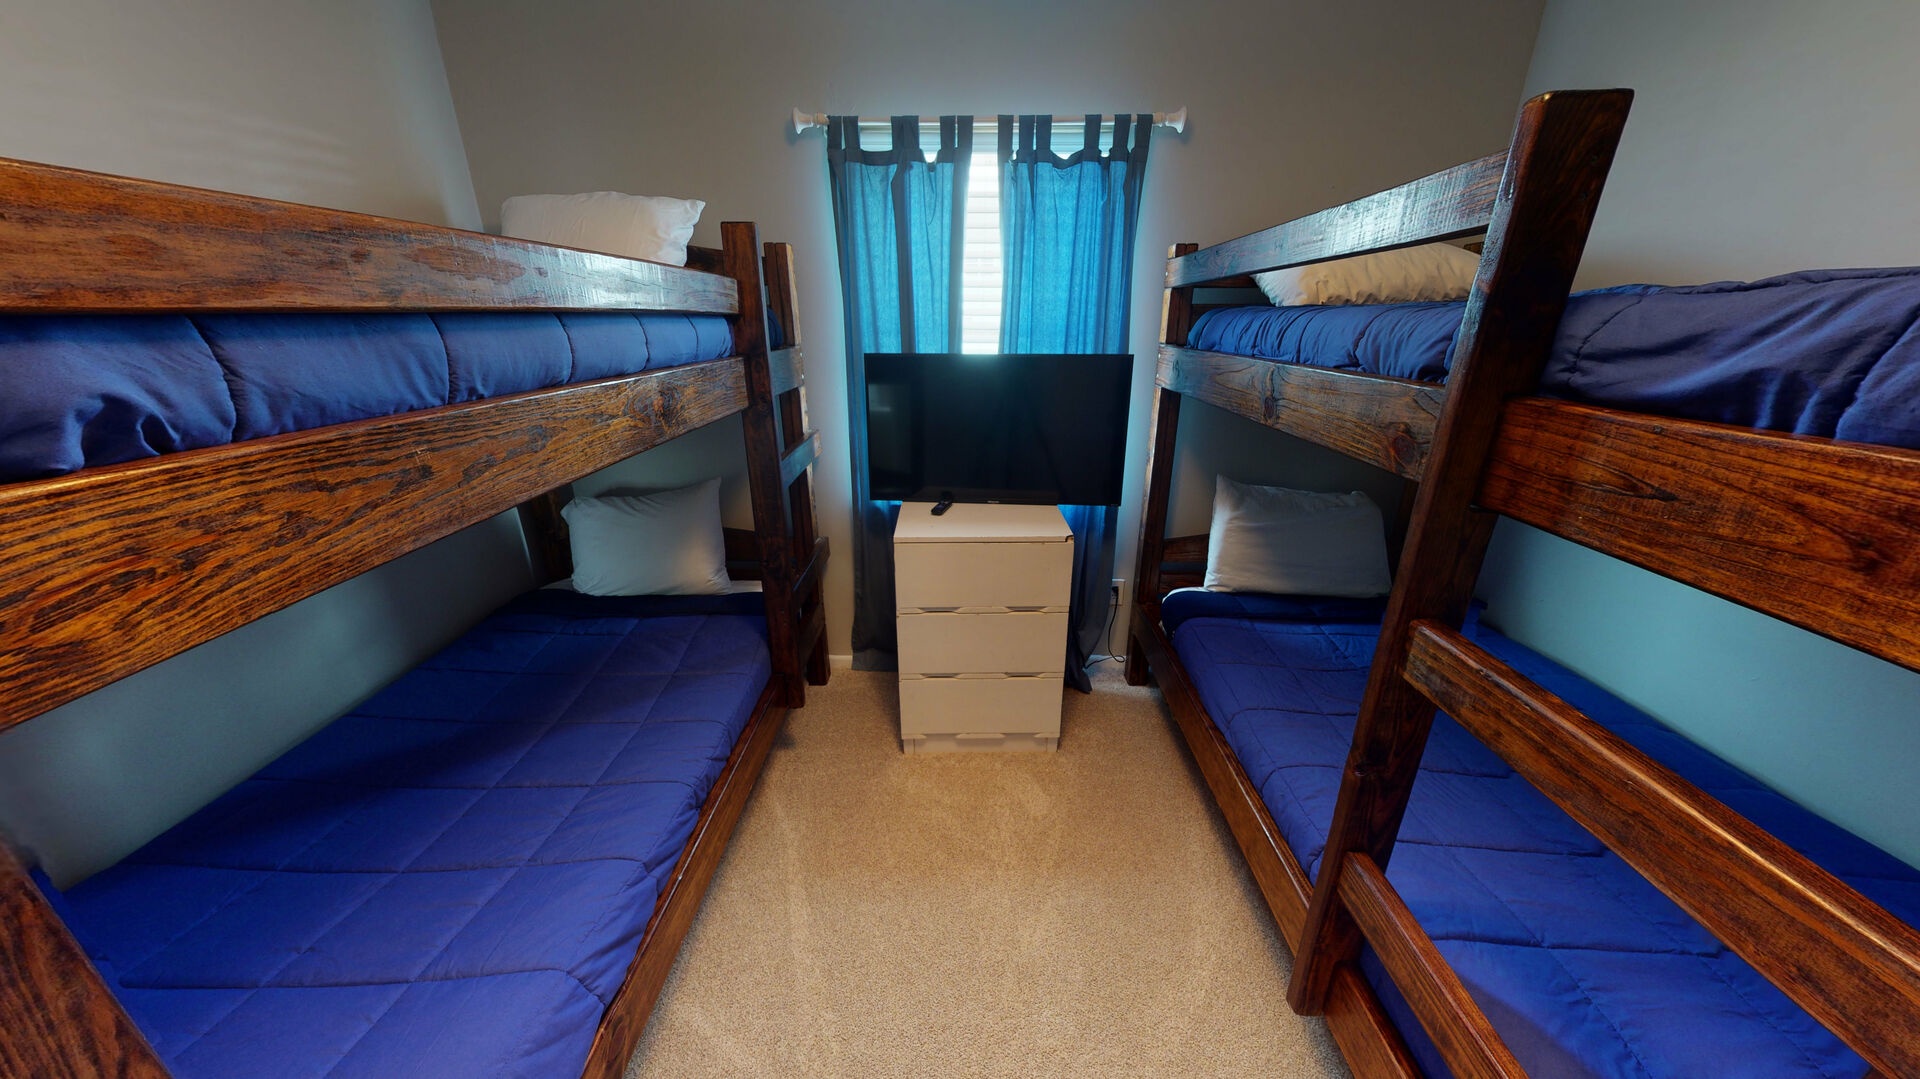 Bedroom 3 has 2 Twin bunk beds and a TV